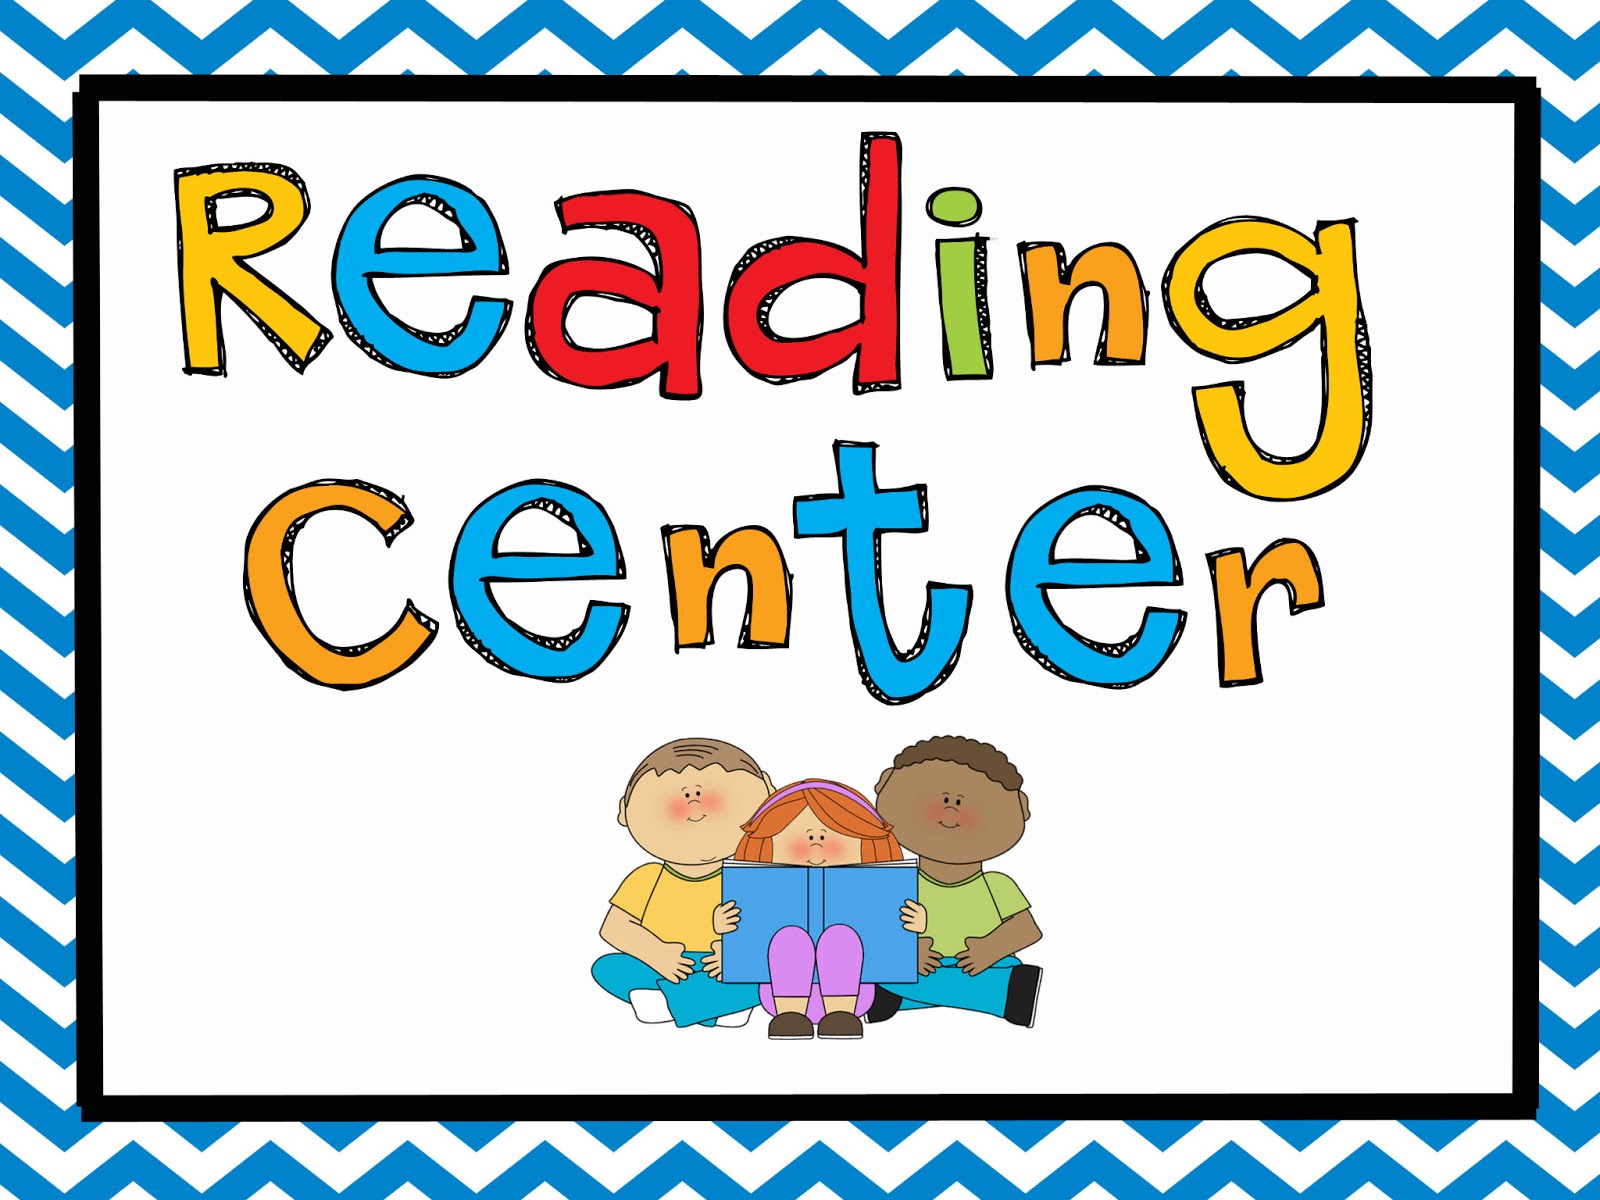 library center clipart - photo #20